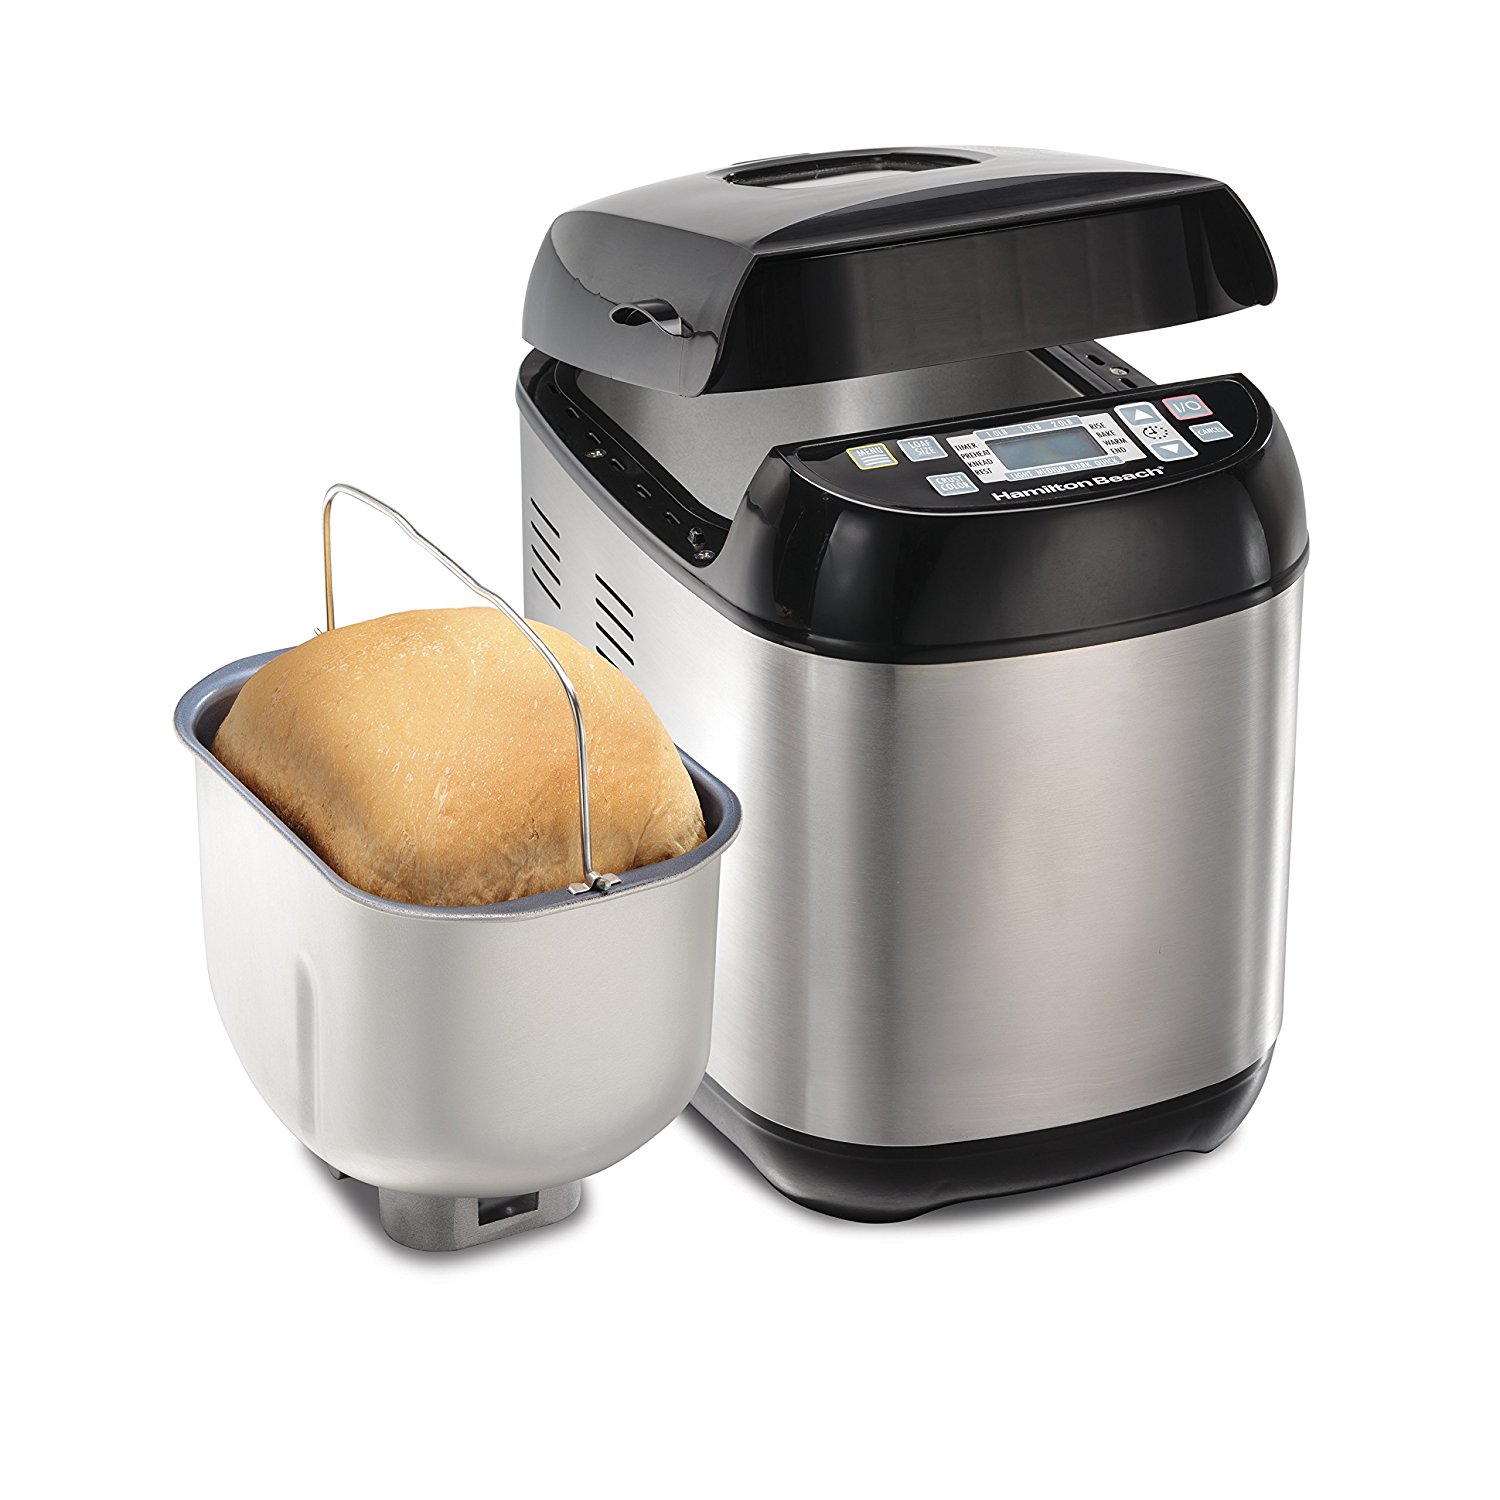 How to Choose the Best Bread Maker - Buying Guide